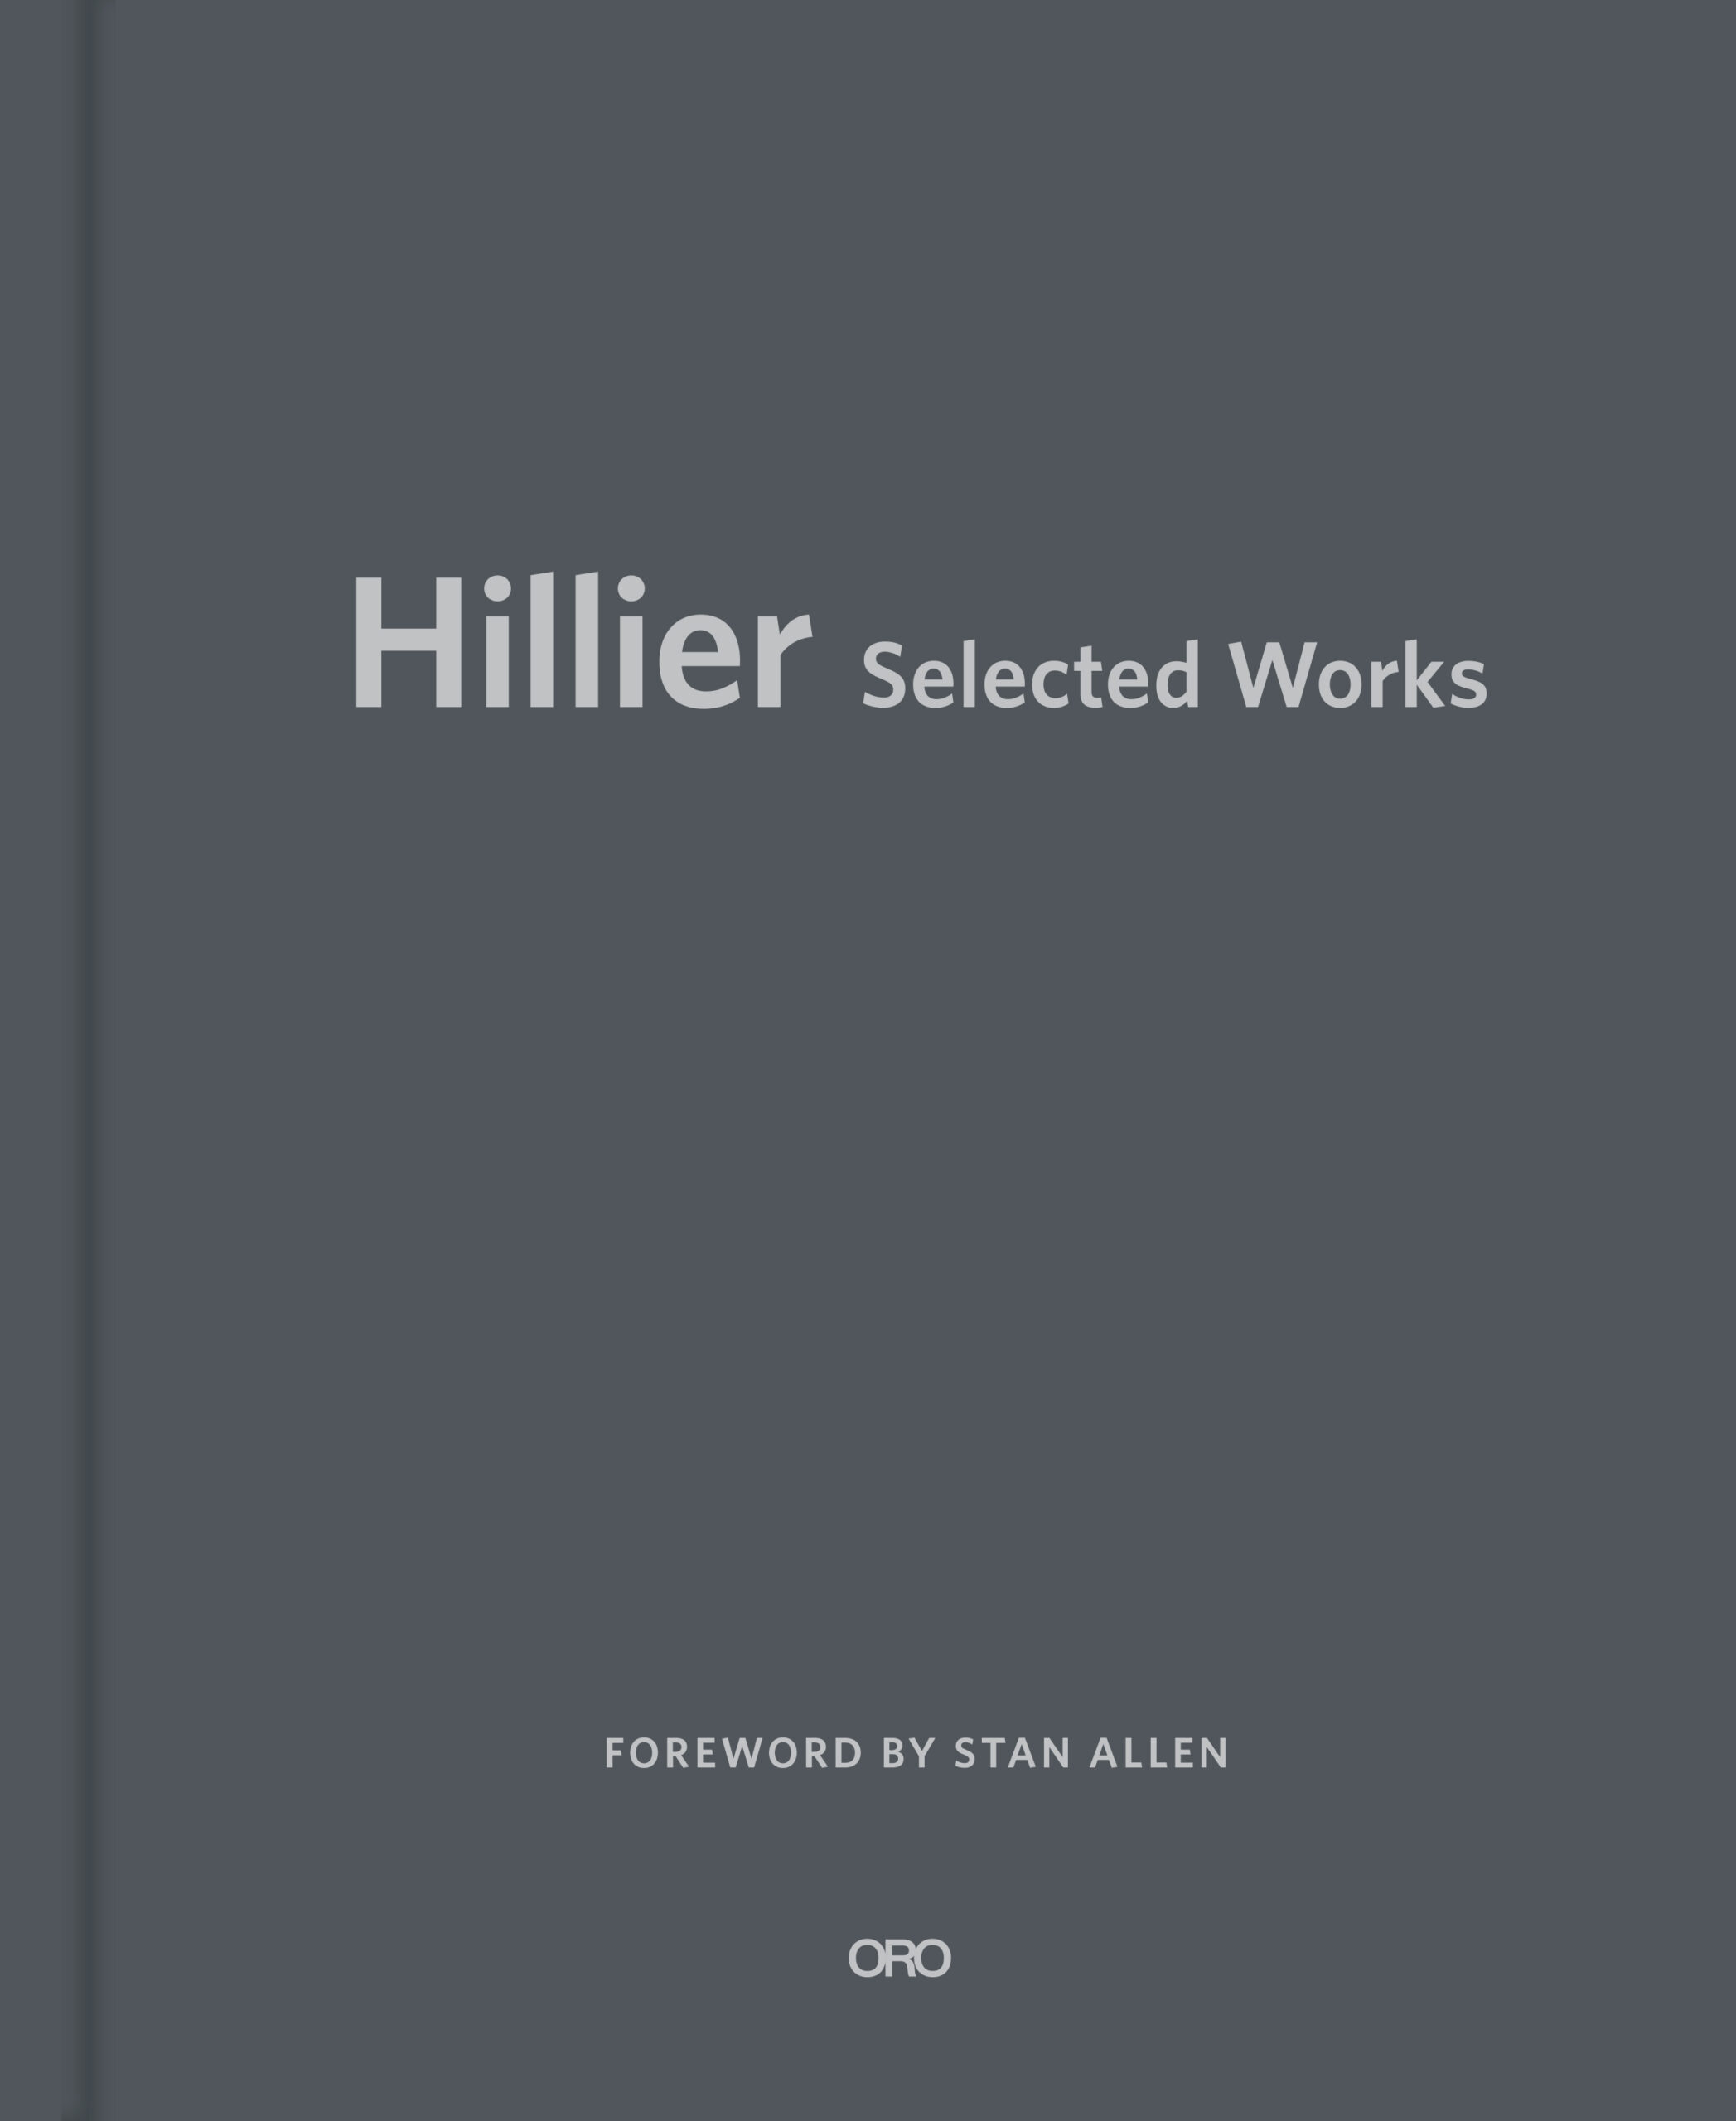 hillier-cover-2022-11-22